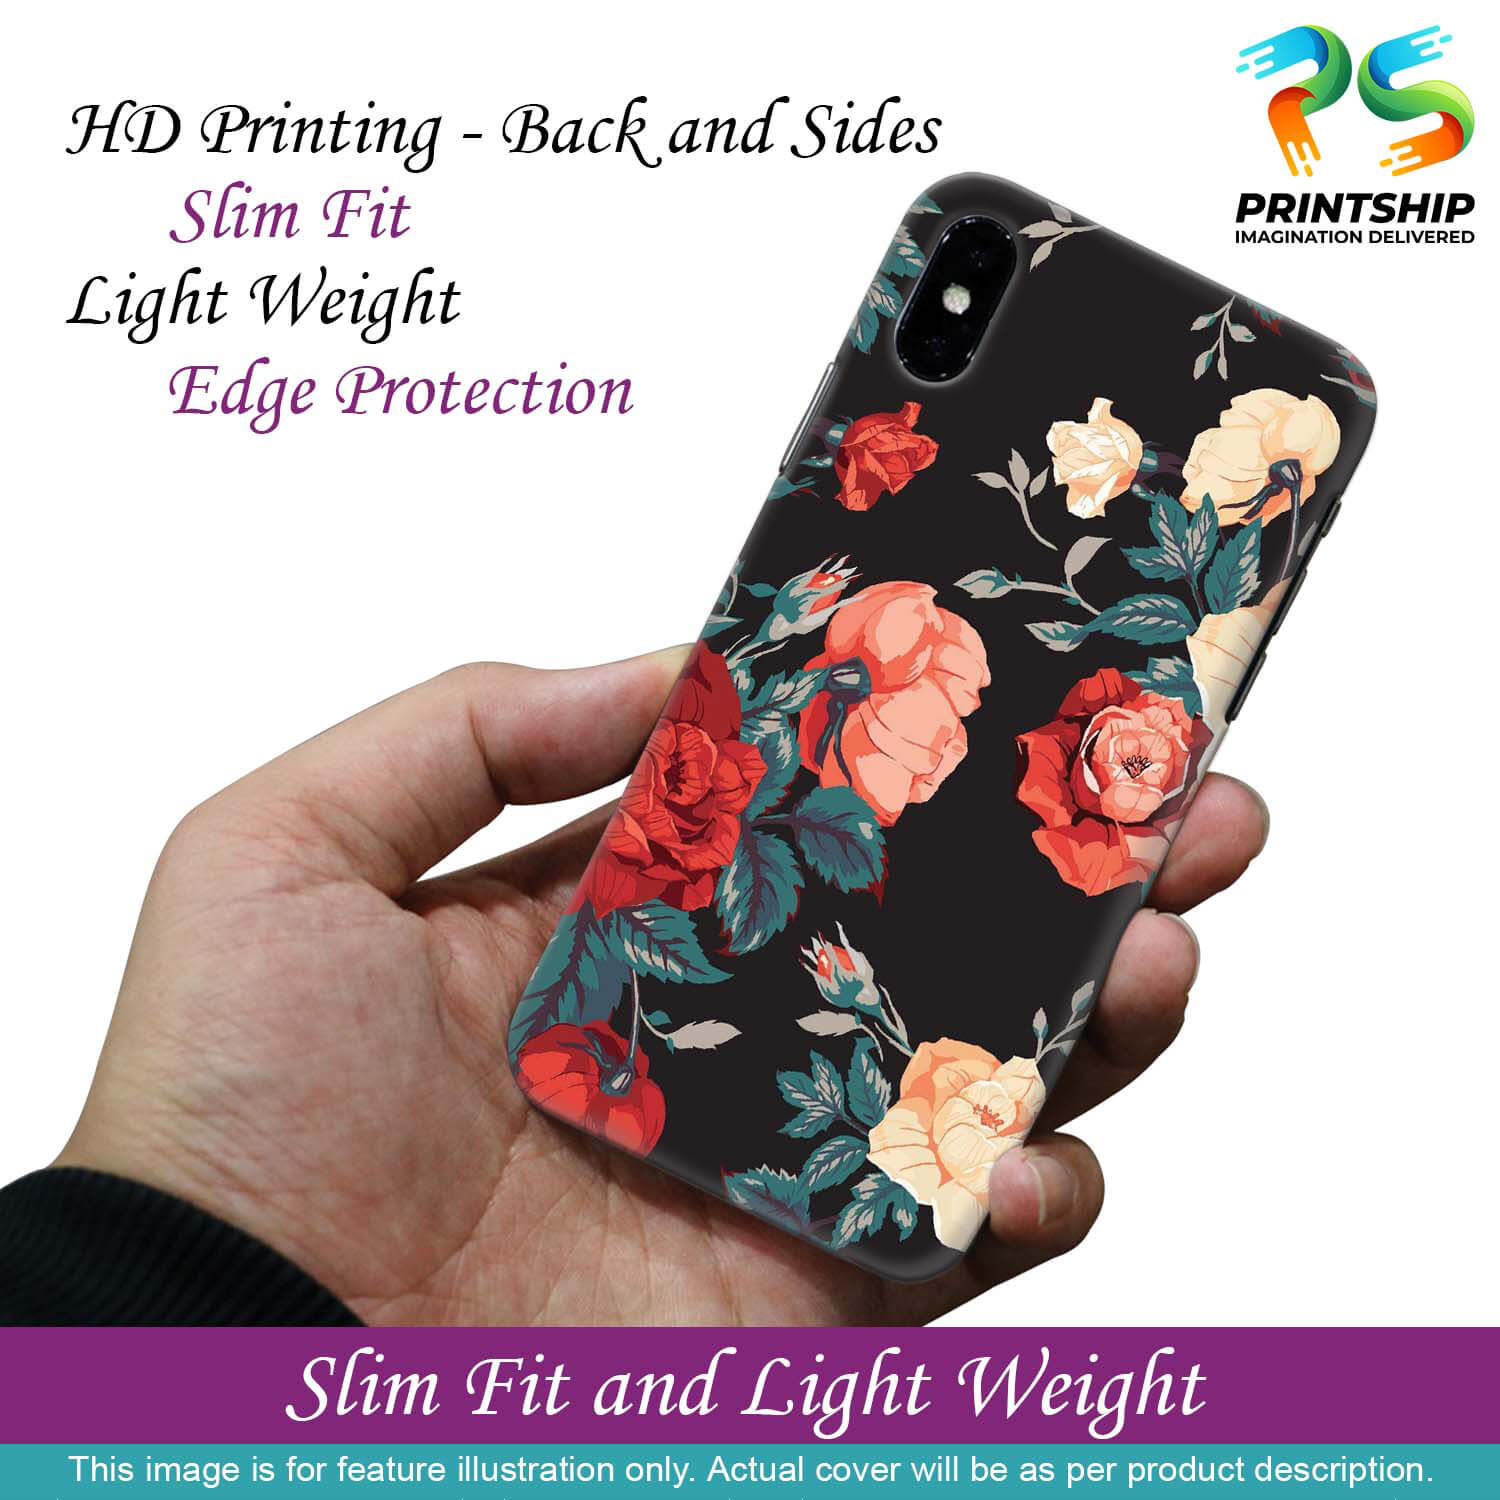 PS1340-Premium Flowers Back Cover for Oppo A15 and Oppo A15s